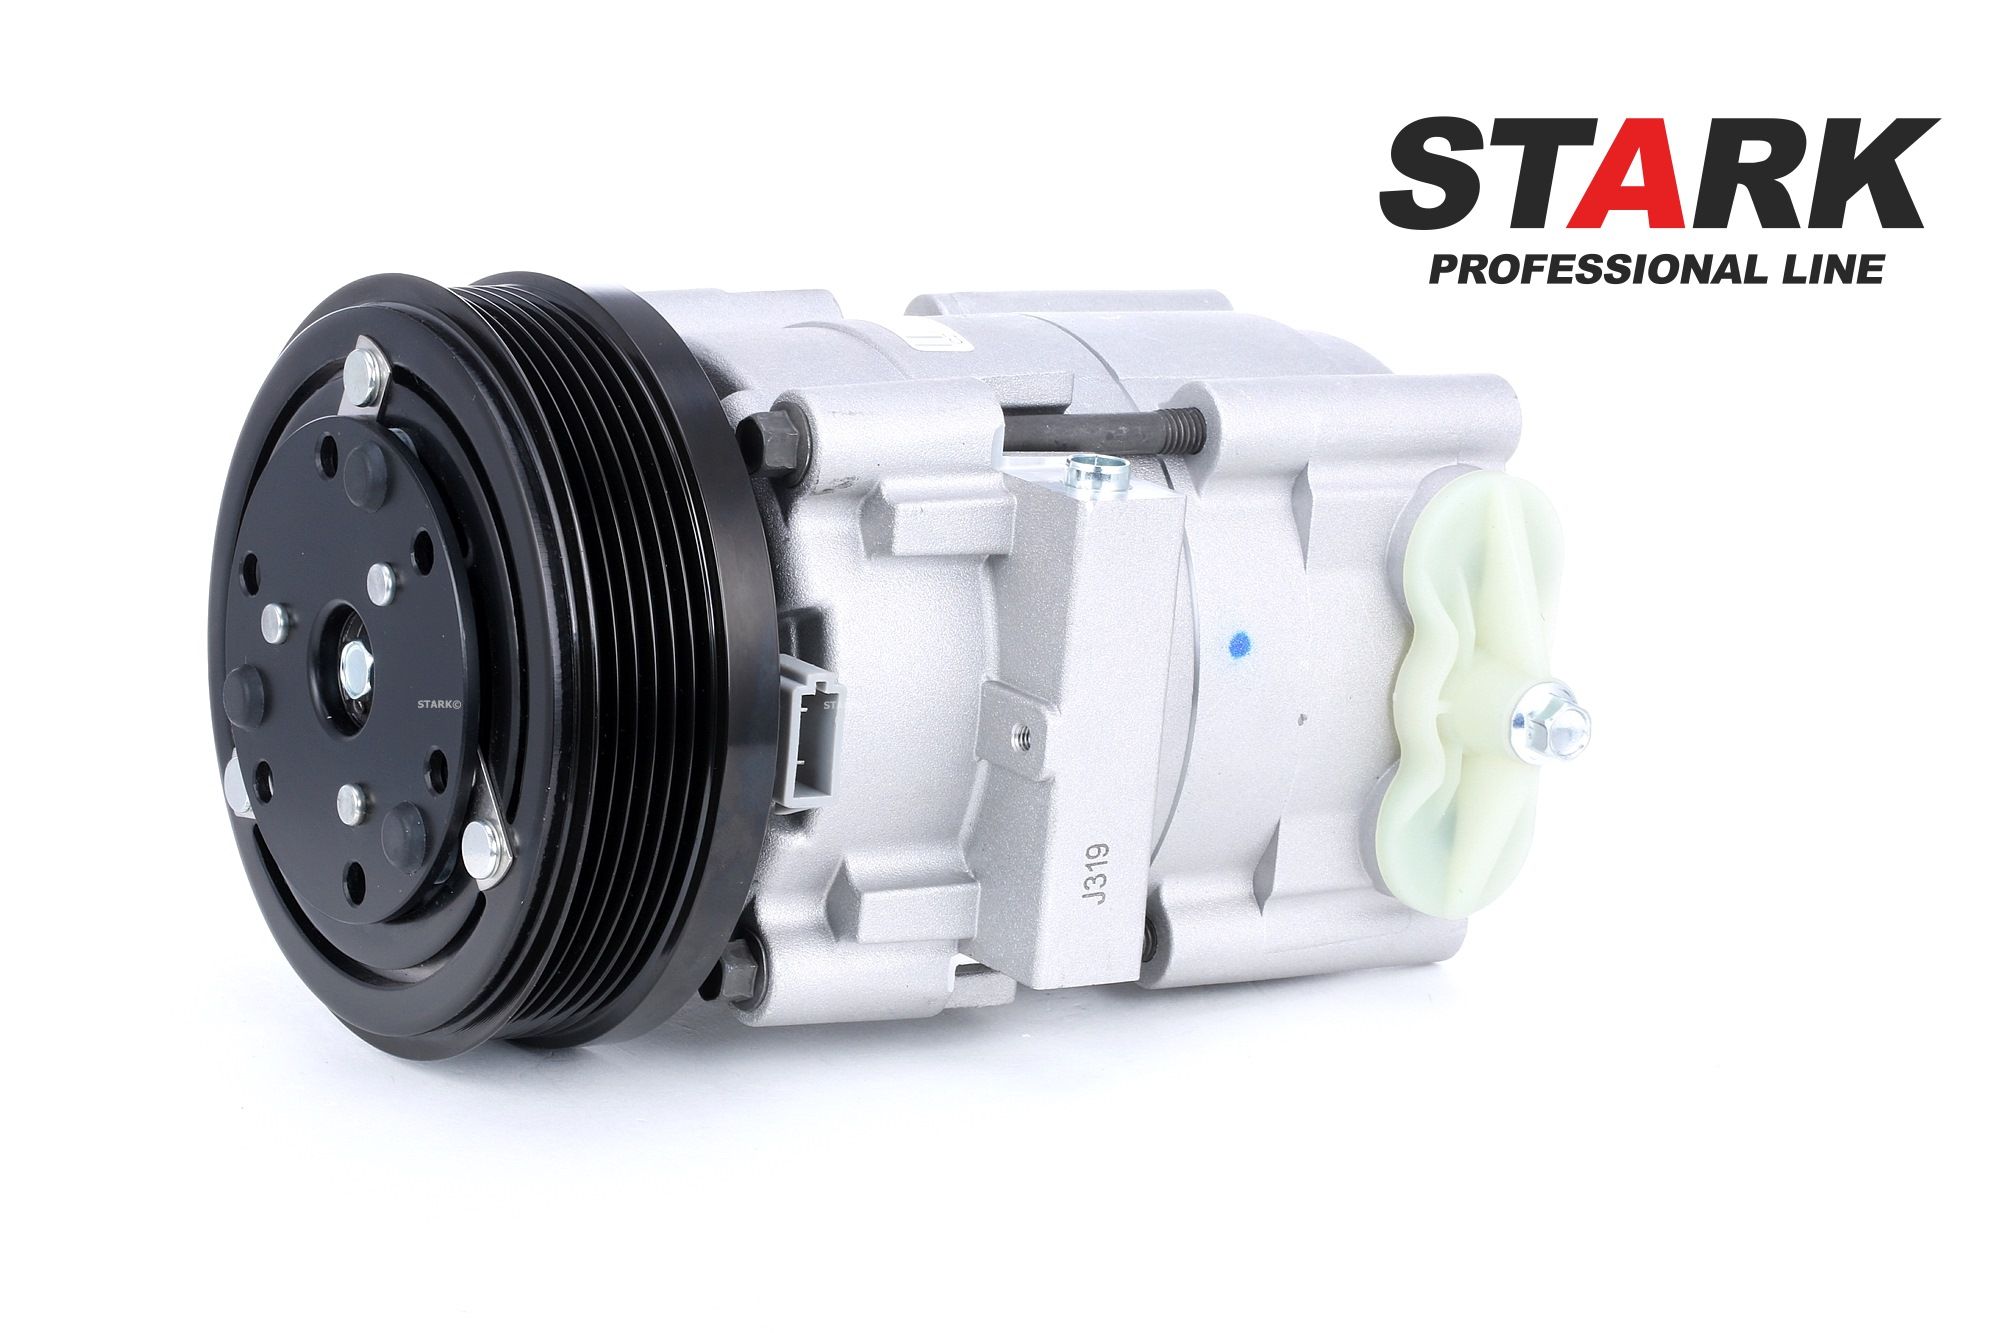 STARK SKKM-0340054 Air conditioning compressor FS10-154, PAG 46, R 134a, with PAG compressor oil